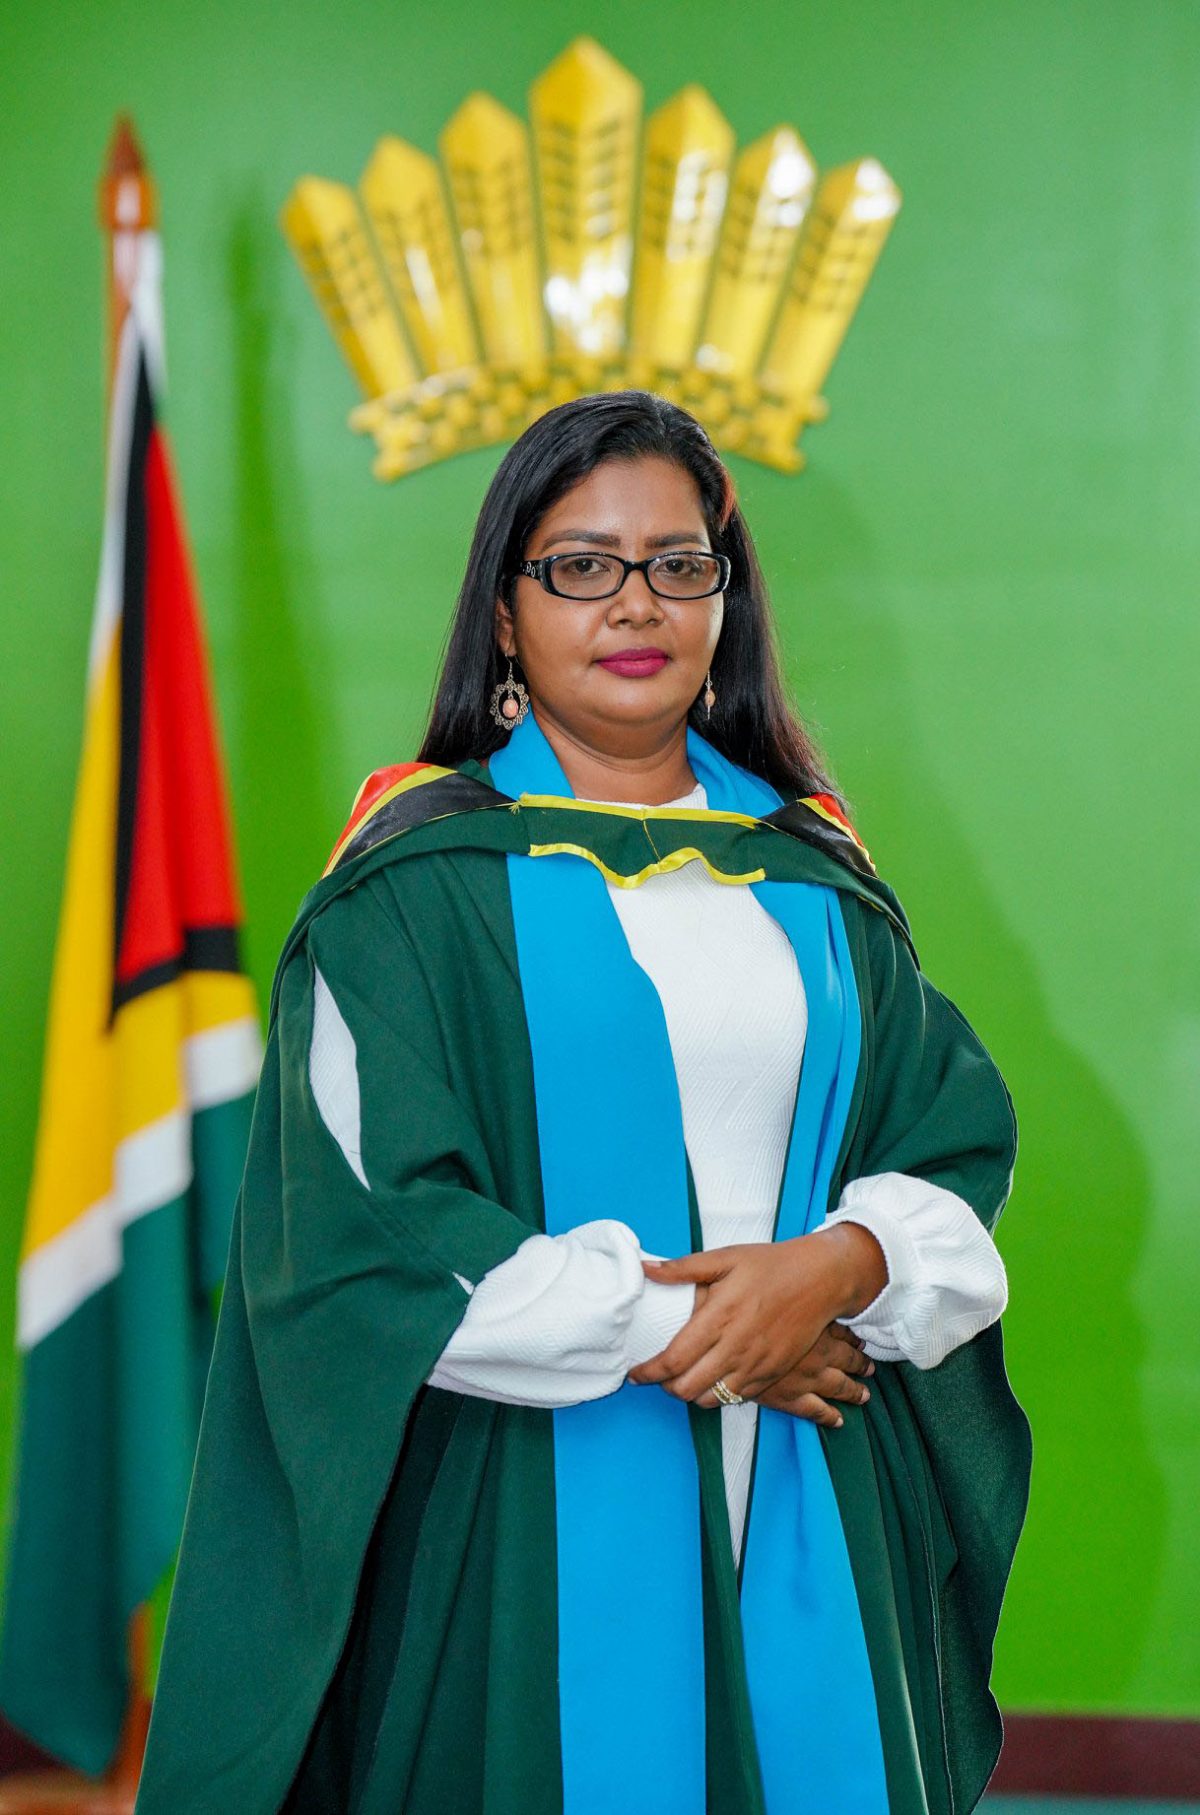 Savitree Budram, 36, was awarded the President’s Medal. The Valedictorian of the Tain Campus completed a Bachelor of Education (Administration) Degree and attained a GPA of 4.0.   (Office of the President photo)